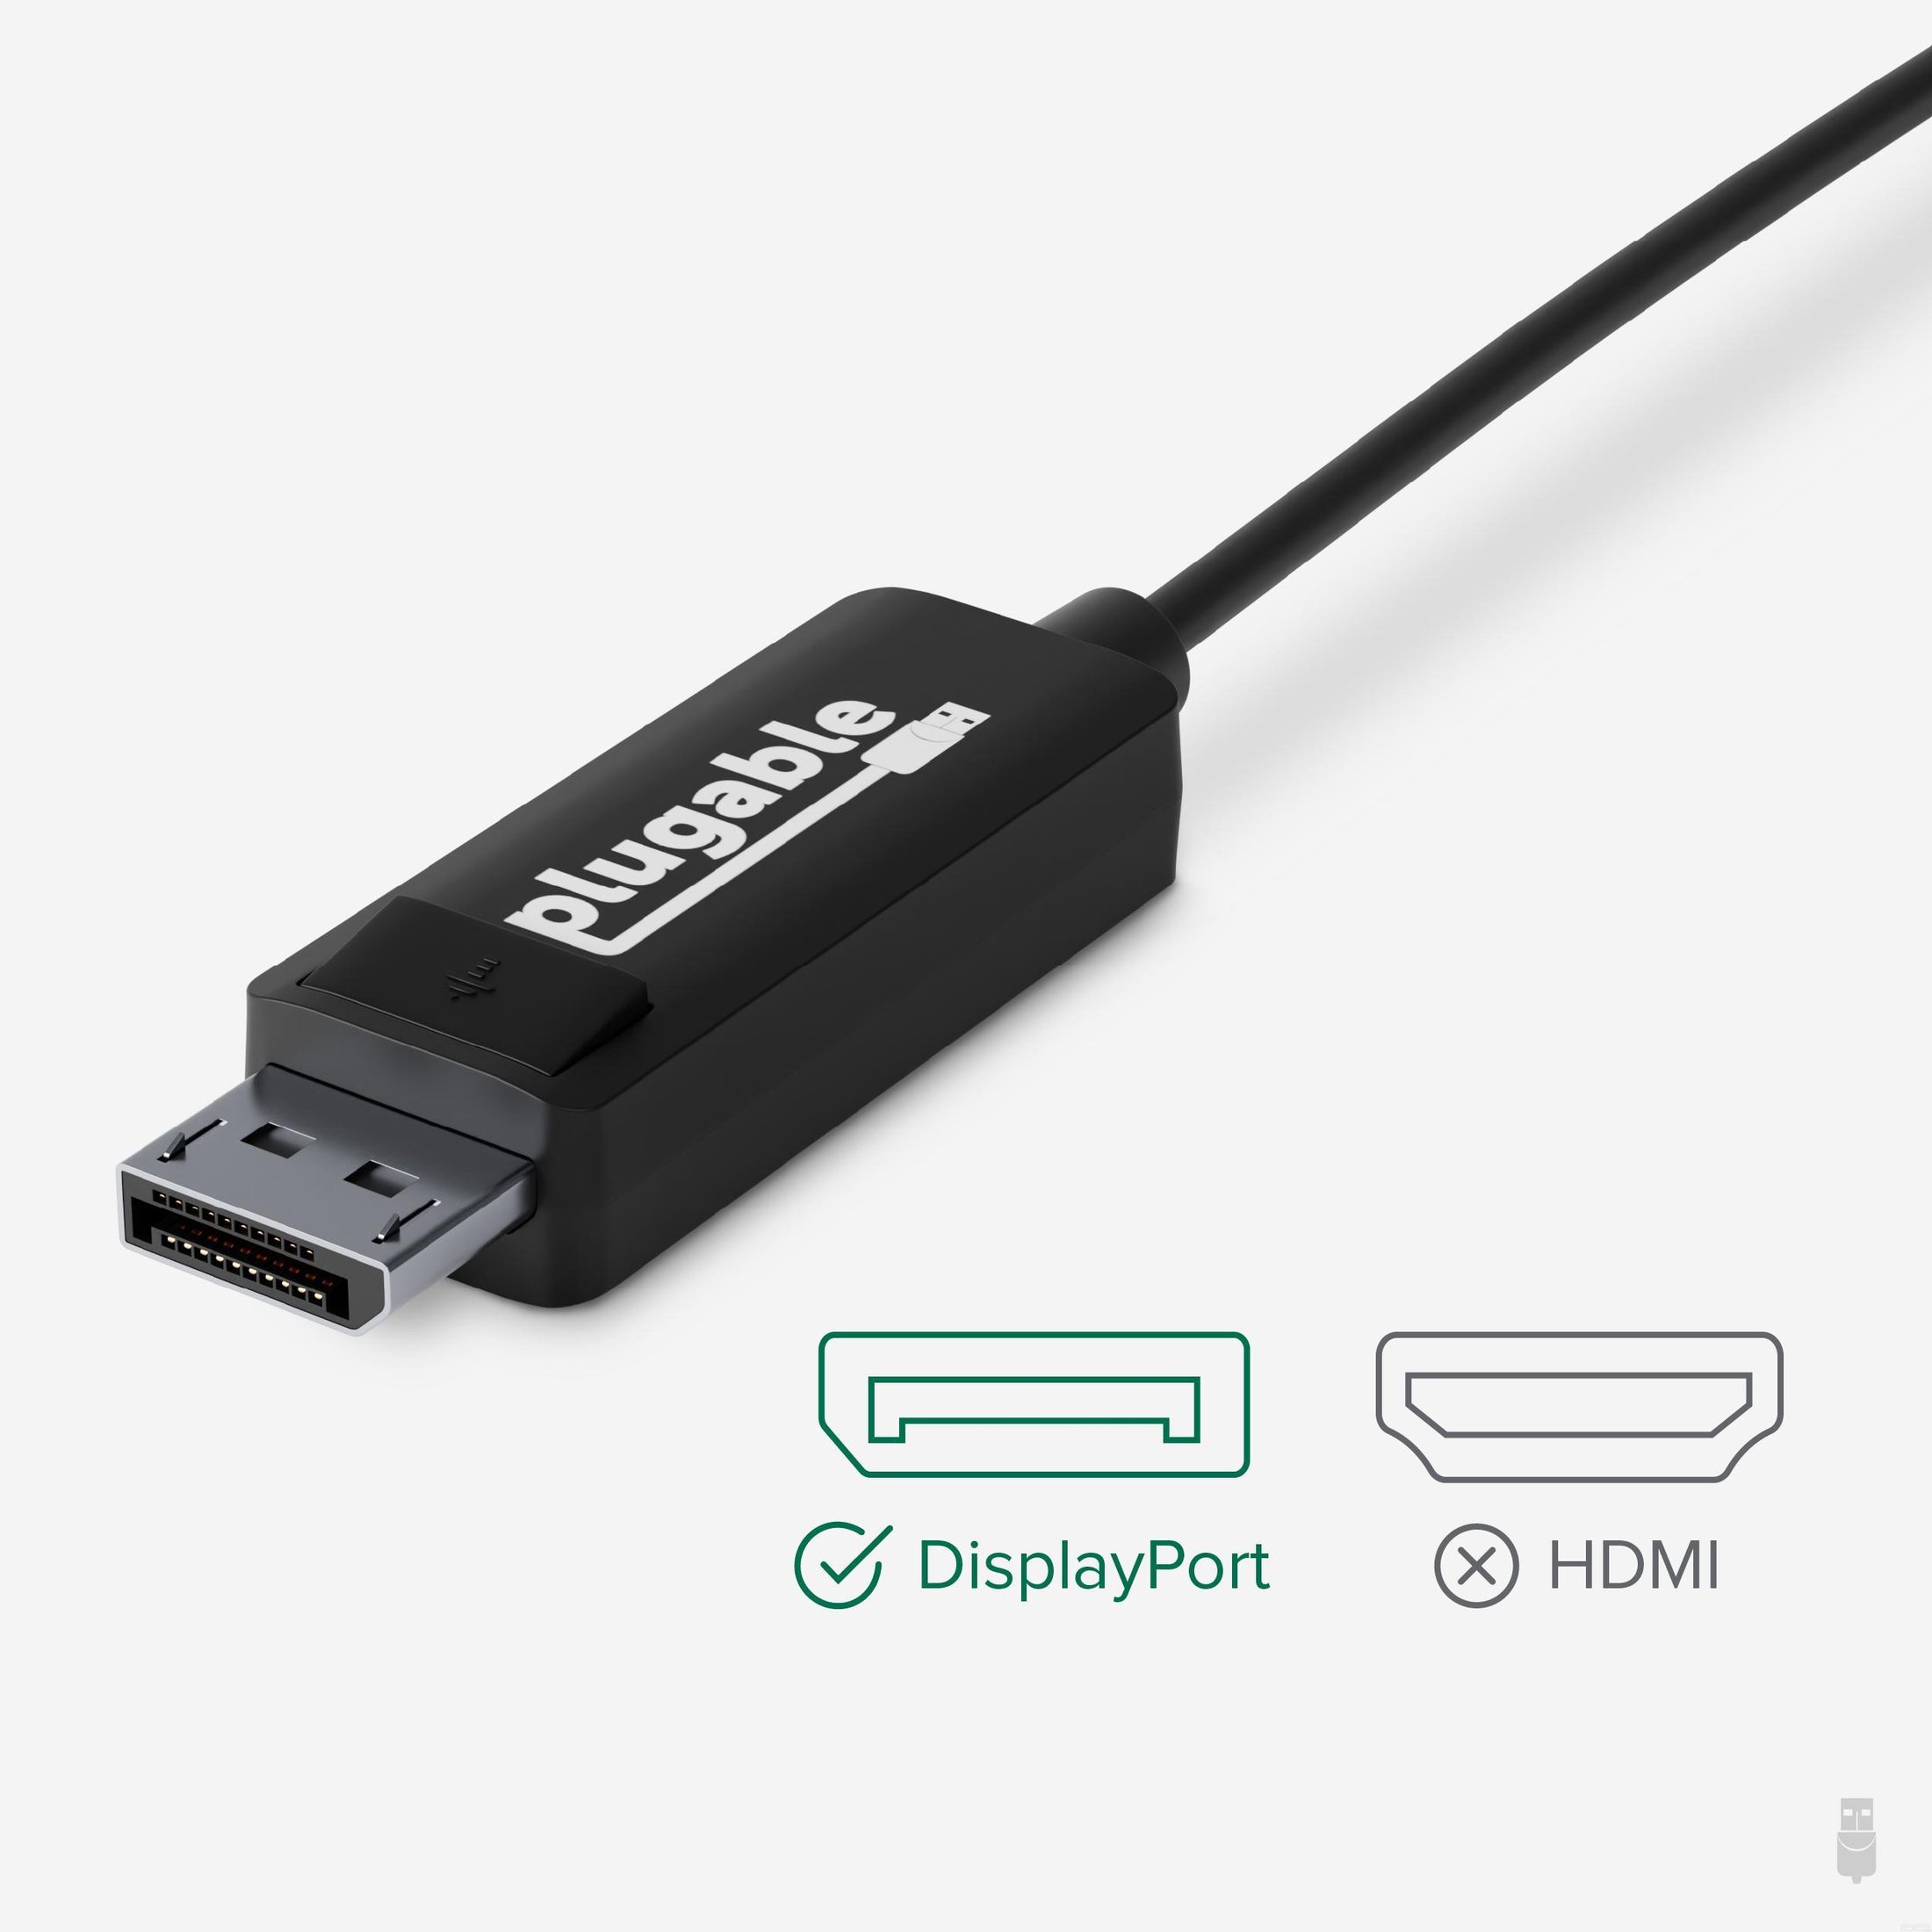 Plugable 3.1 to DisplayPort Adapter Cable – Plugable